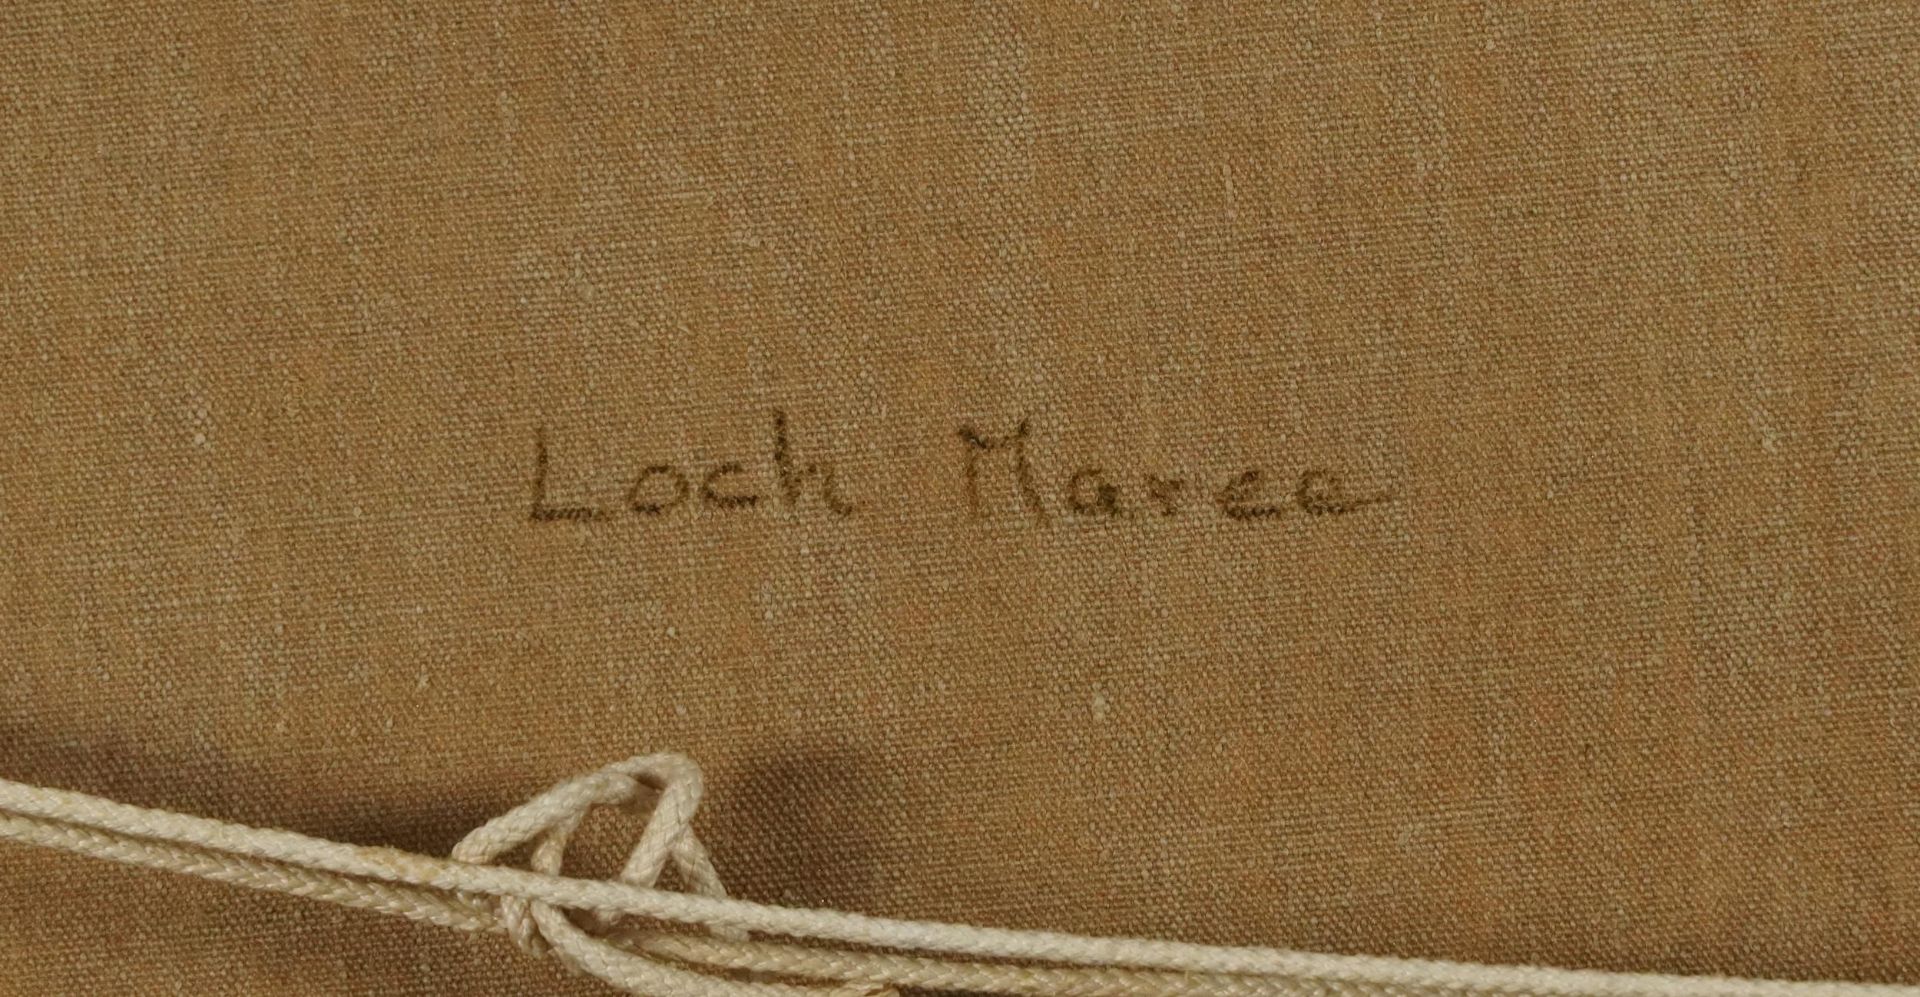 Prudence Turner - Loch Maree, Scottish school oil on canvas, inscribed verso, mounted and framed, - Image 5 of 6